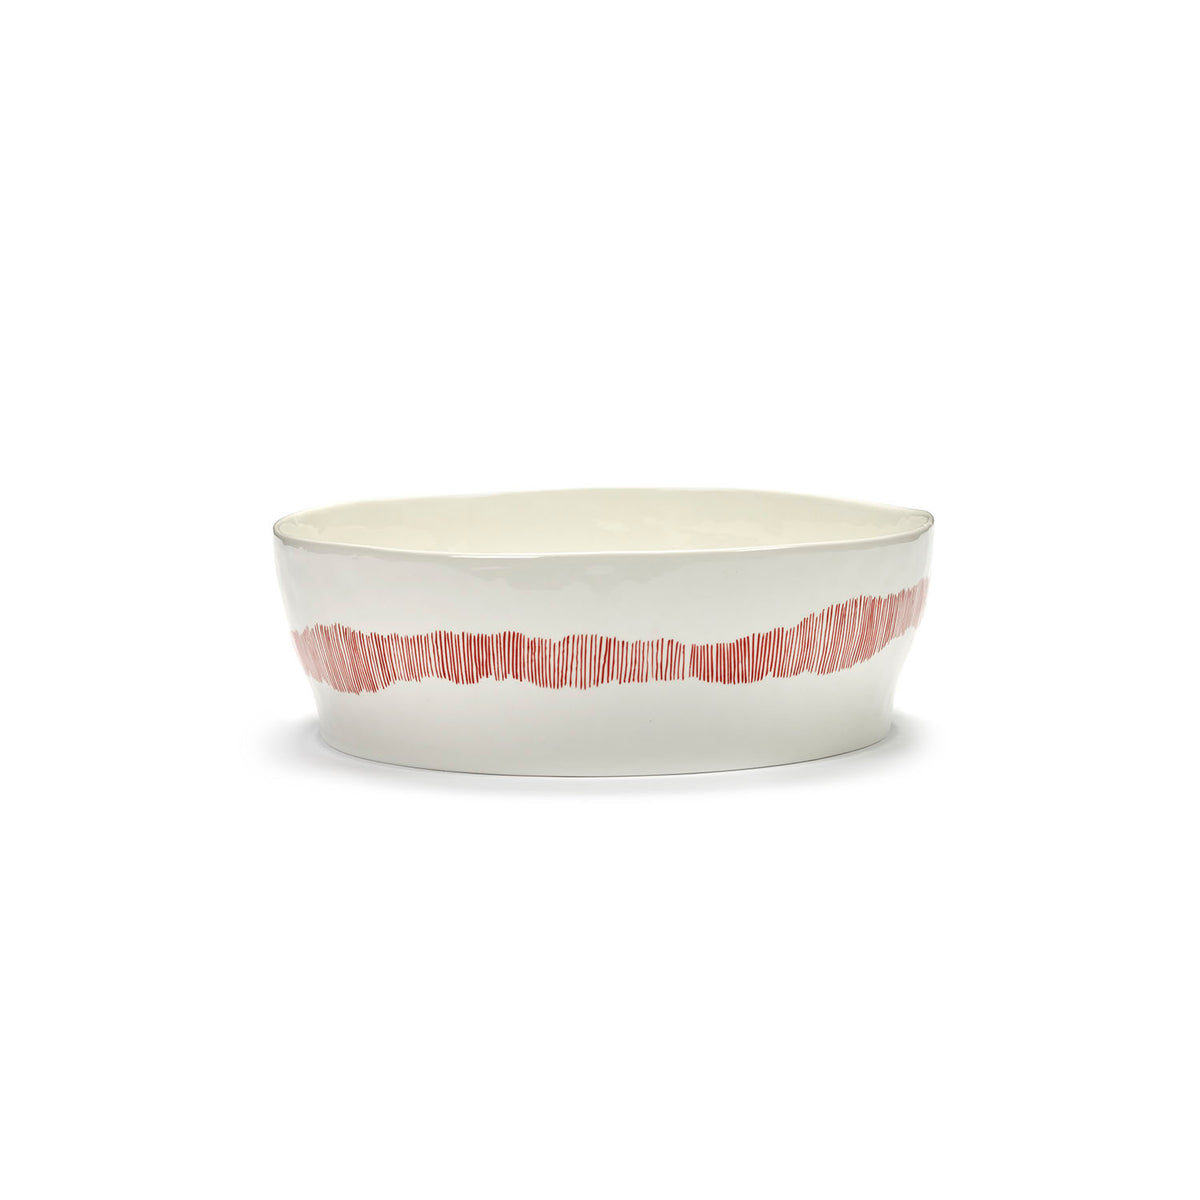 Ottolenghi for Serax Feast collection, side view of salad bowl, with white swirl-stripes red design.